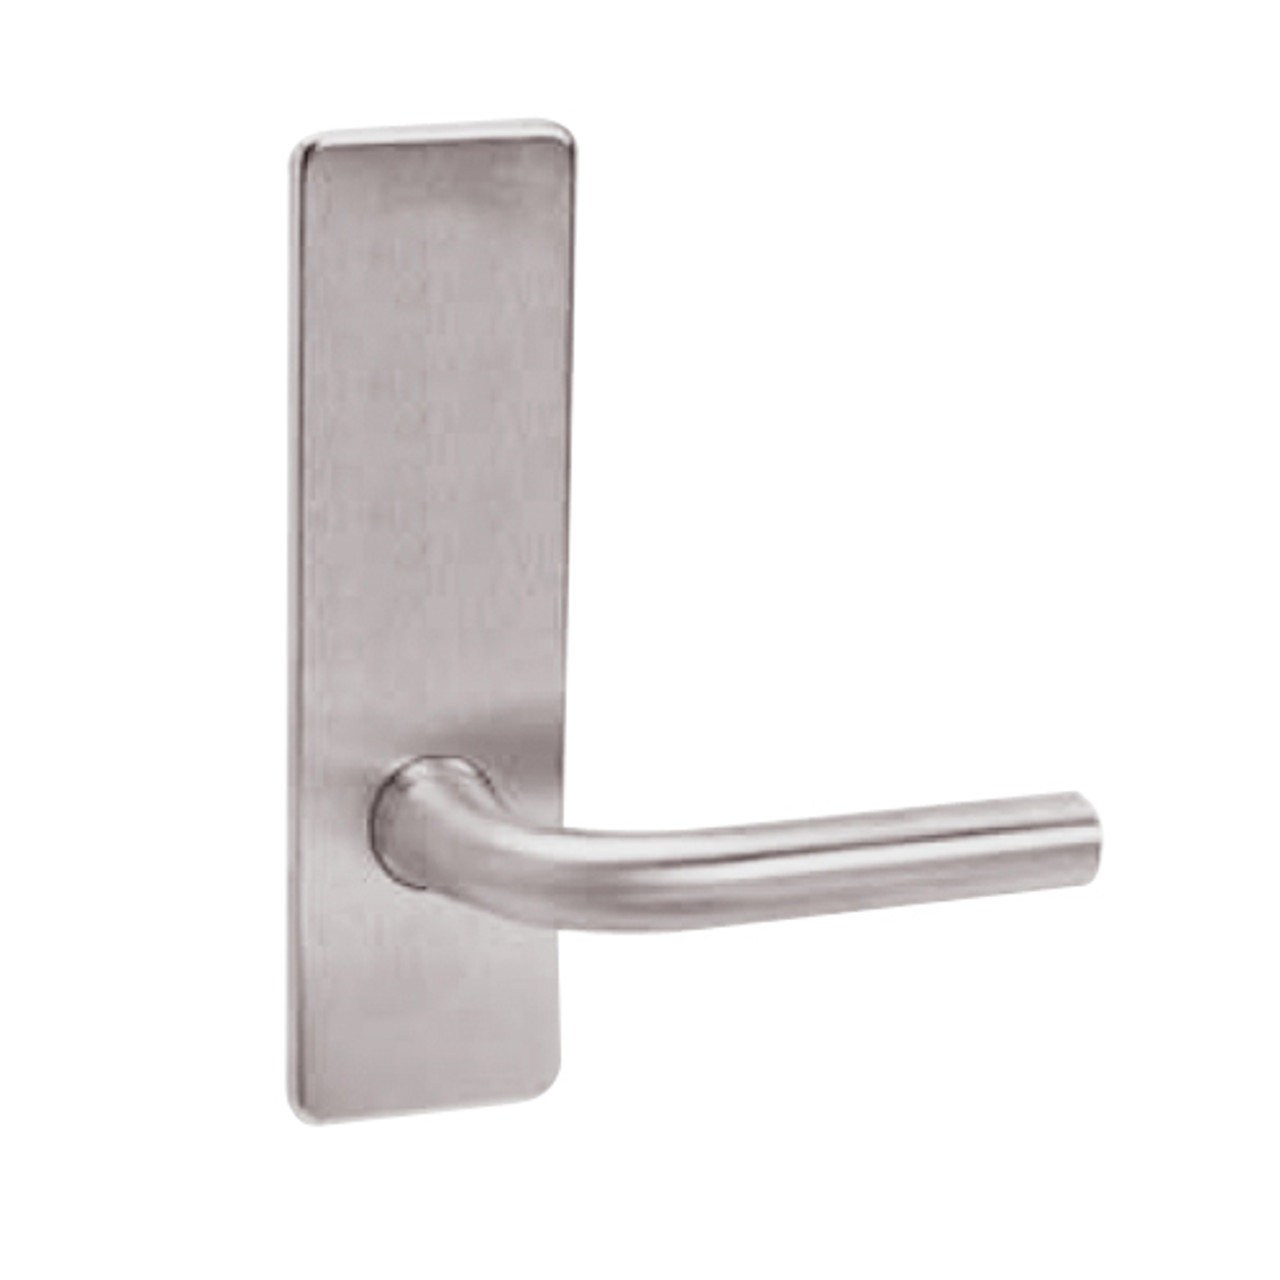 ML2010-RSM-630-M31 Corbin Russwin ML2000 Series Mortise Passage Trim Pack with Regis Lever in Satin Stainless